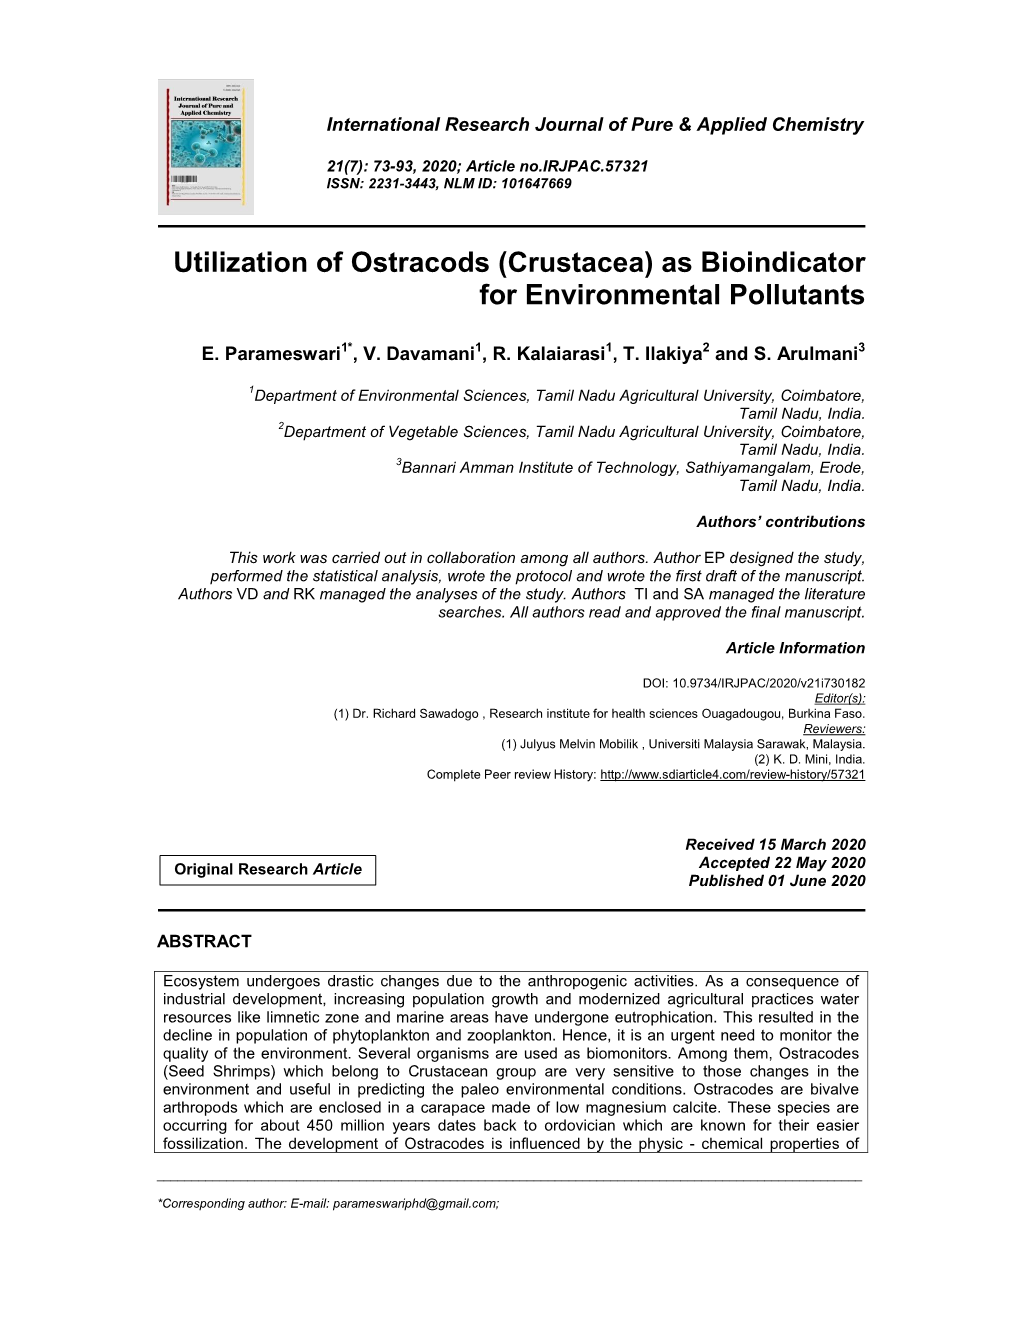 Utilization of Ostracods (Crustacea) As Bioindicator for Environmental Pollutants